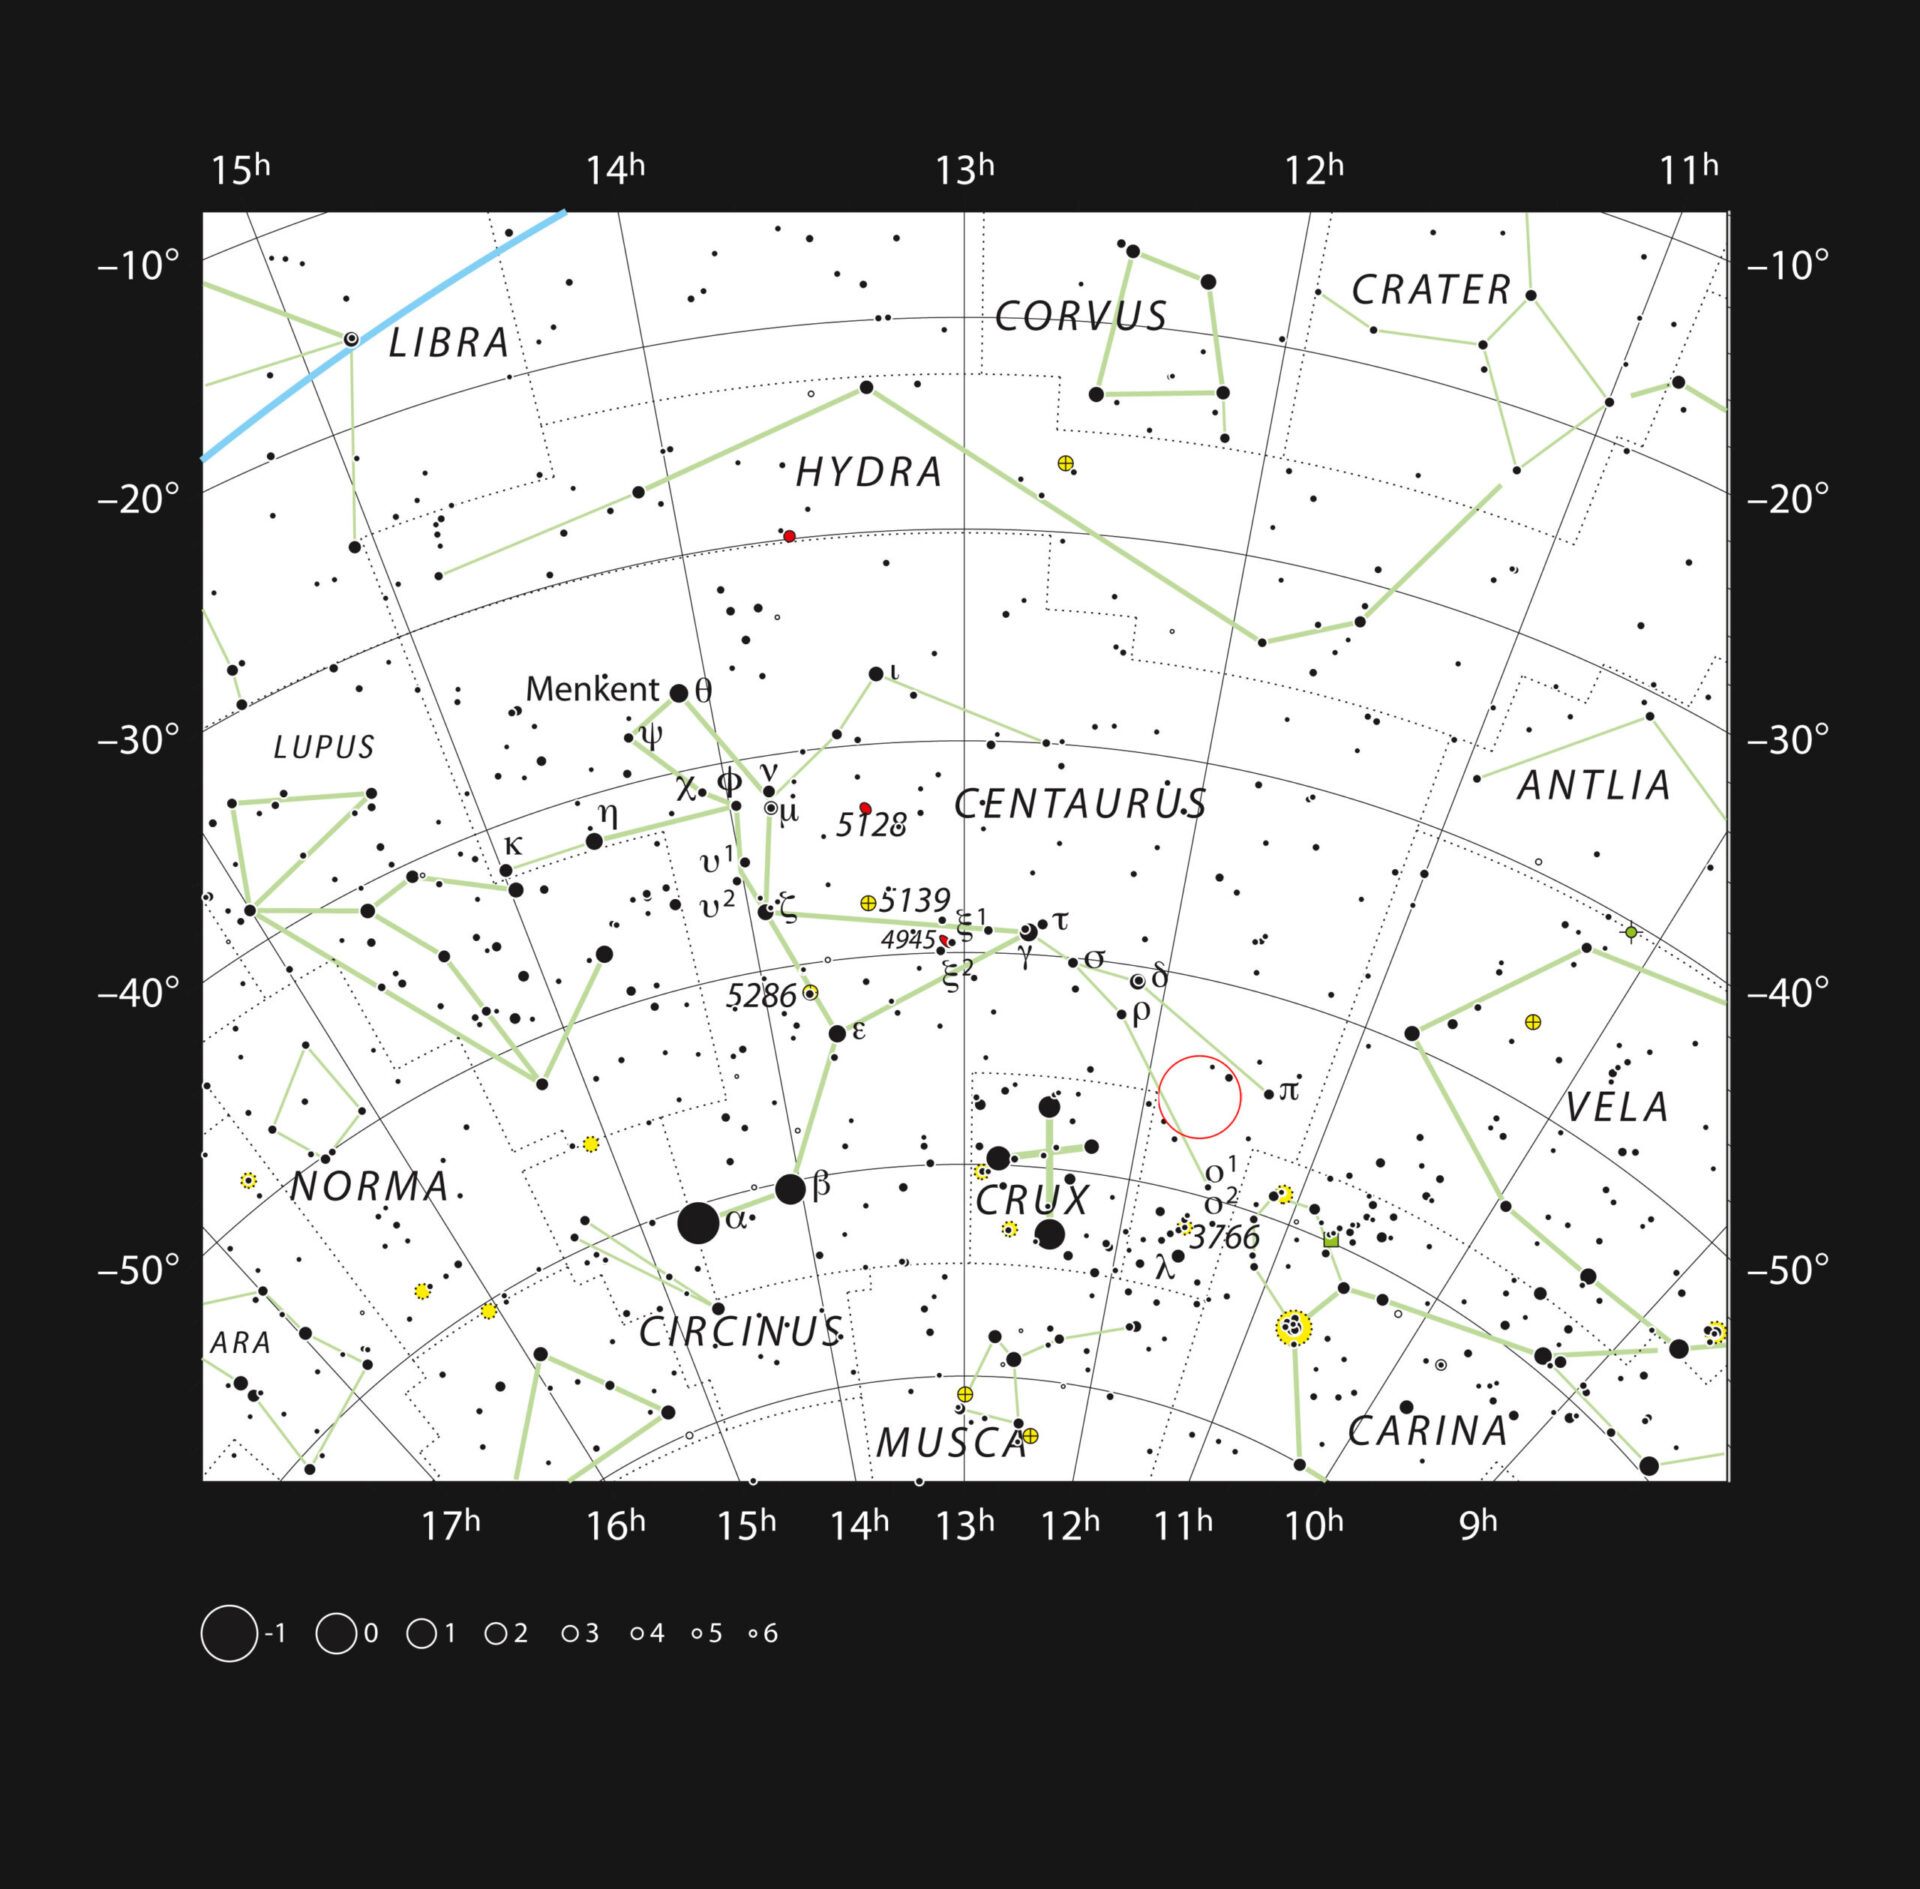 <p>This chart shows the location of HD101584, a gas cloud surrounding a binary star recently studied with ALMA and APEX, in the constellation of Centaurus. The map shows most of the stars visible to the unaided eye under good conditions, and HD101584 itself is highlighted with a red circle on the image.</p>
<p>Credit:<br />
ESO, IAU and Sky & Telescope</p>
